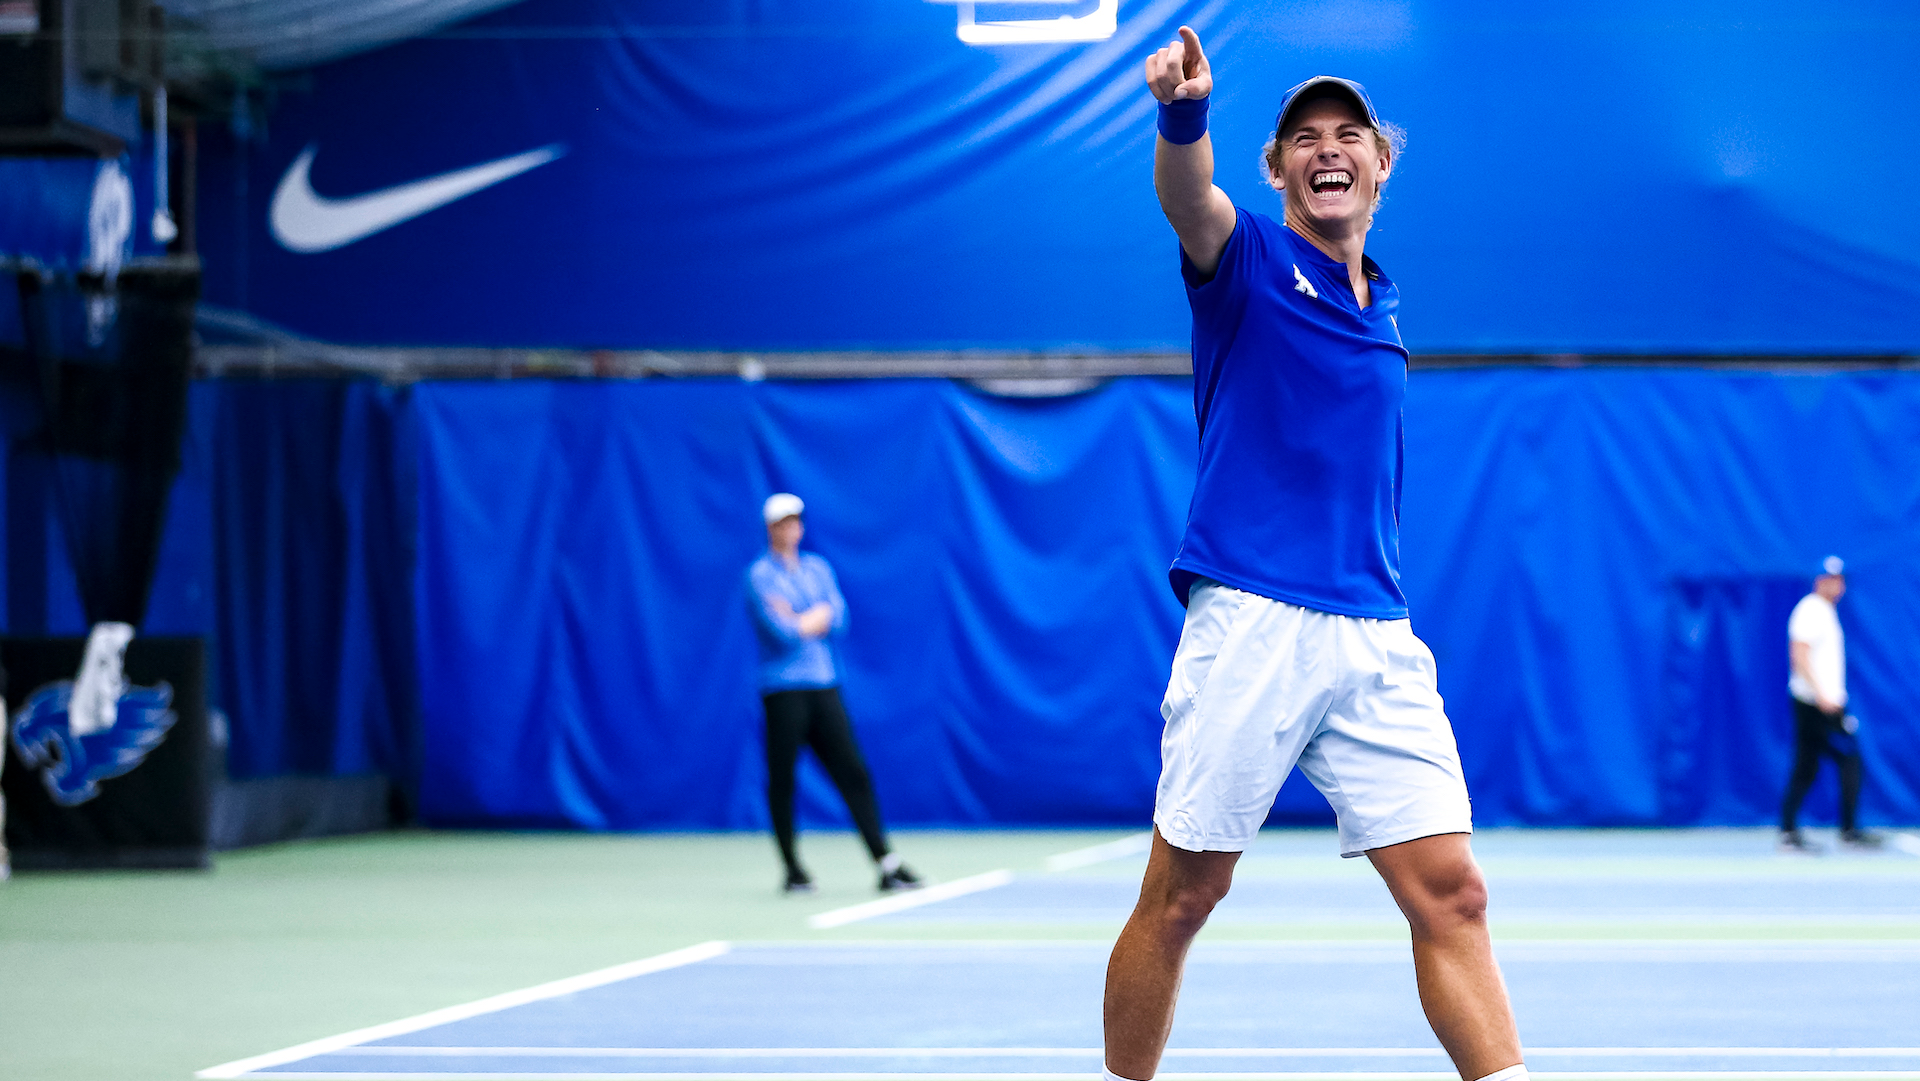 Draxl, Cats Continue to Build UK Tennis Culture